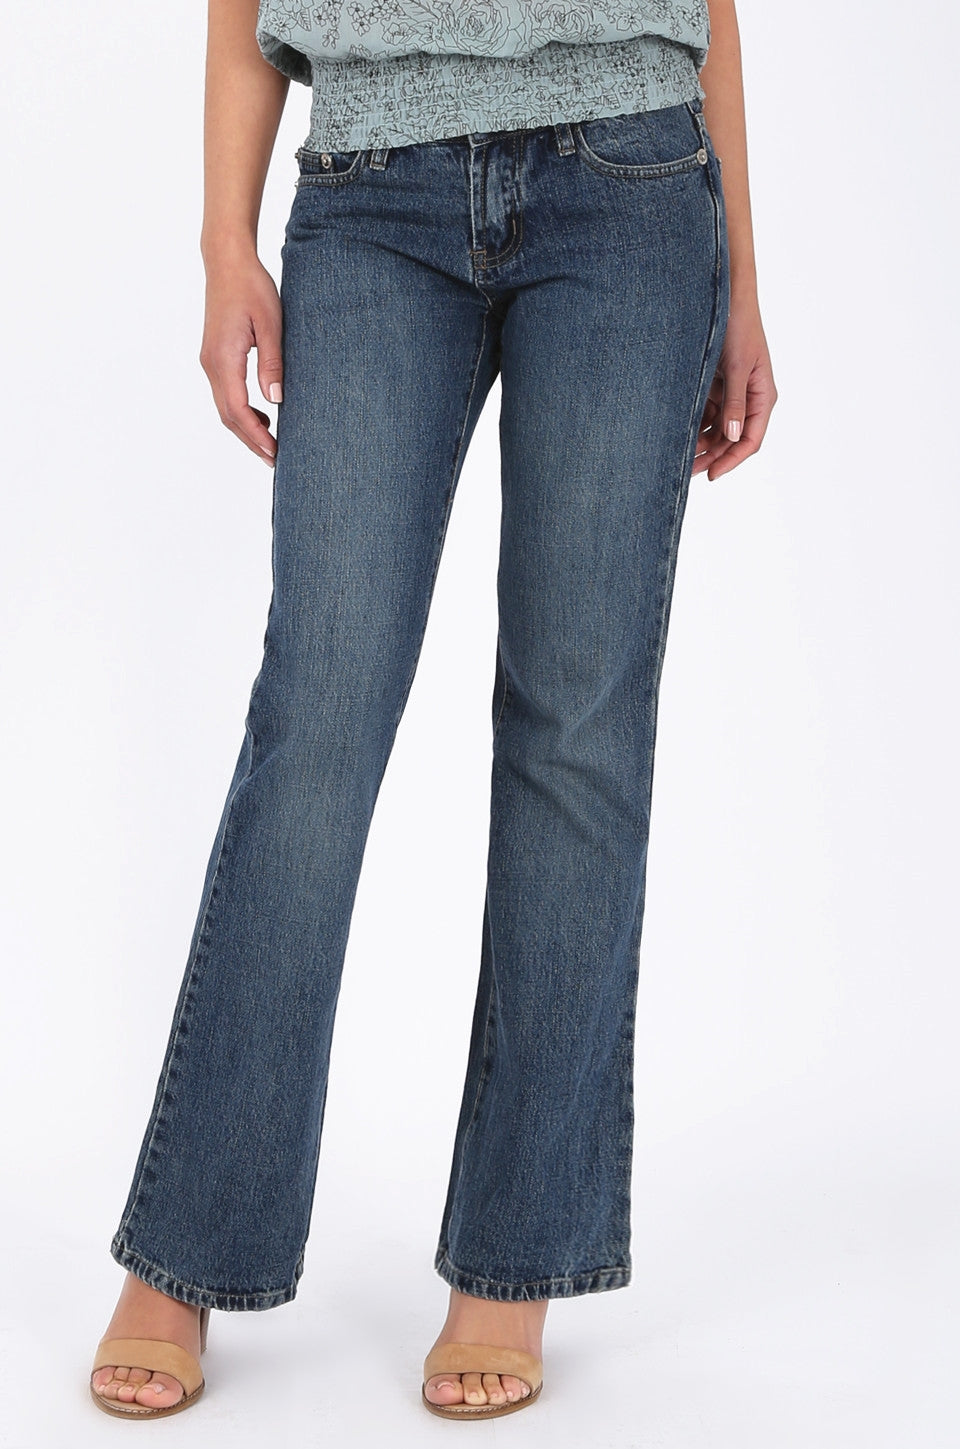 MISS PINKI Nora bootlegs jeans in blue